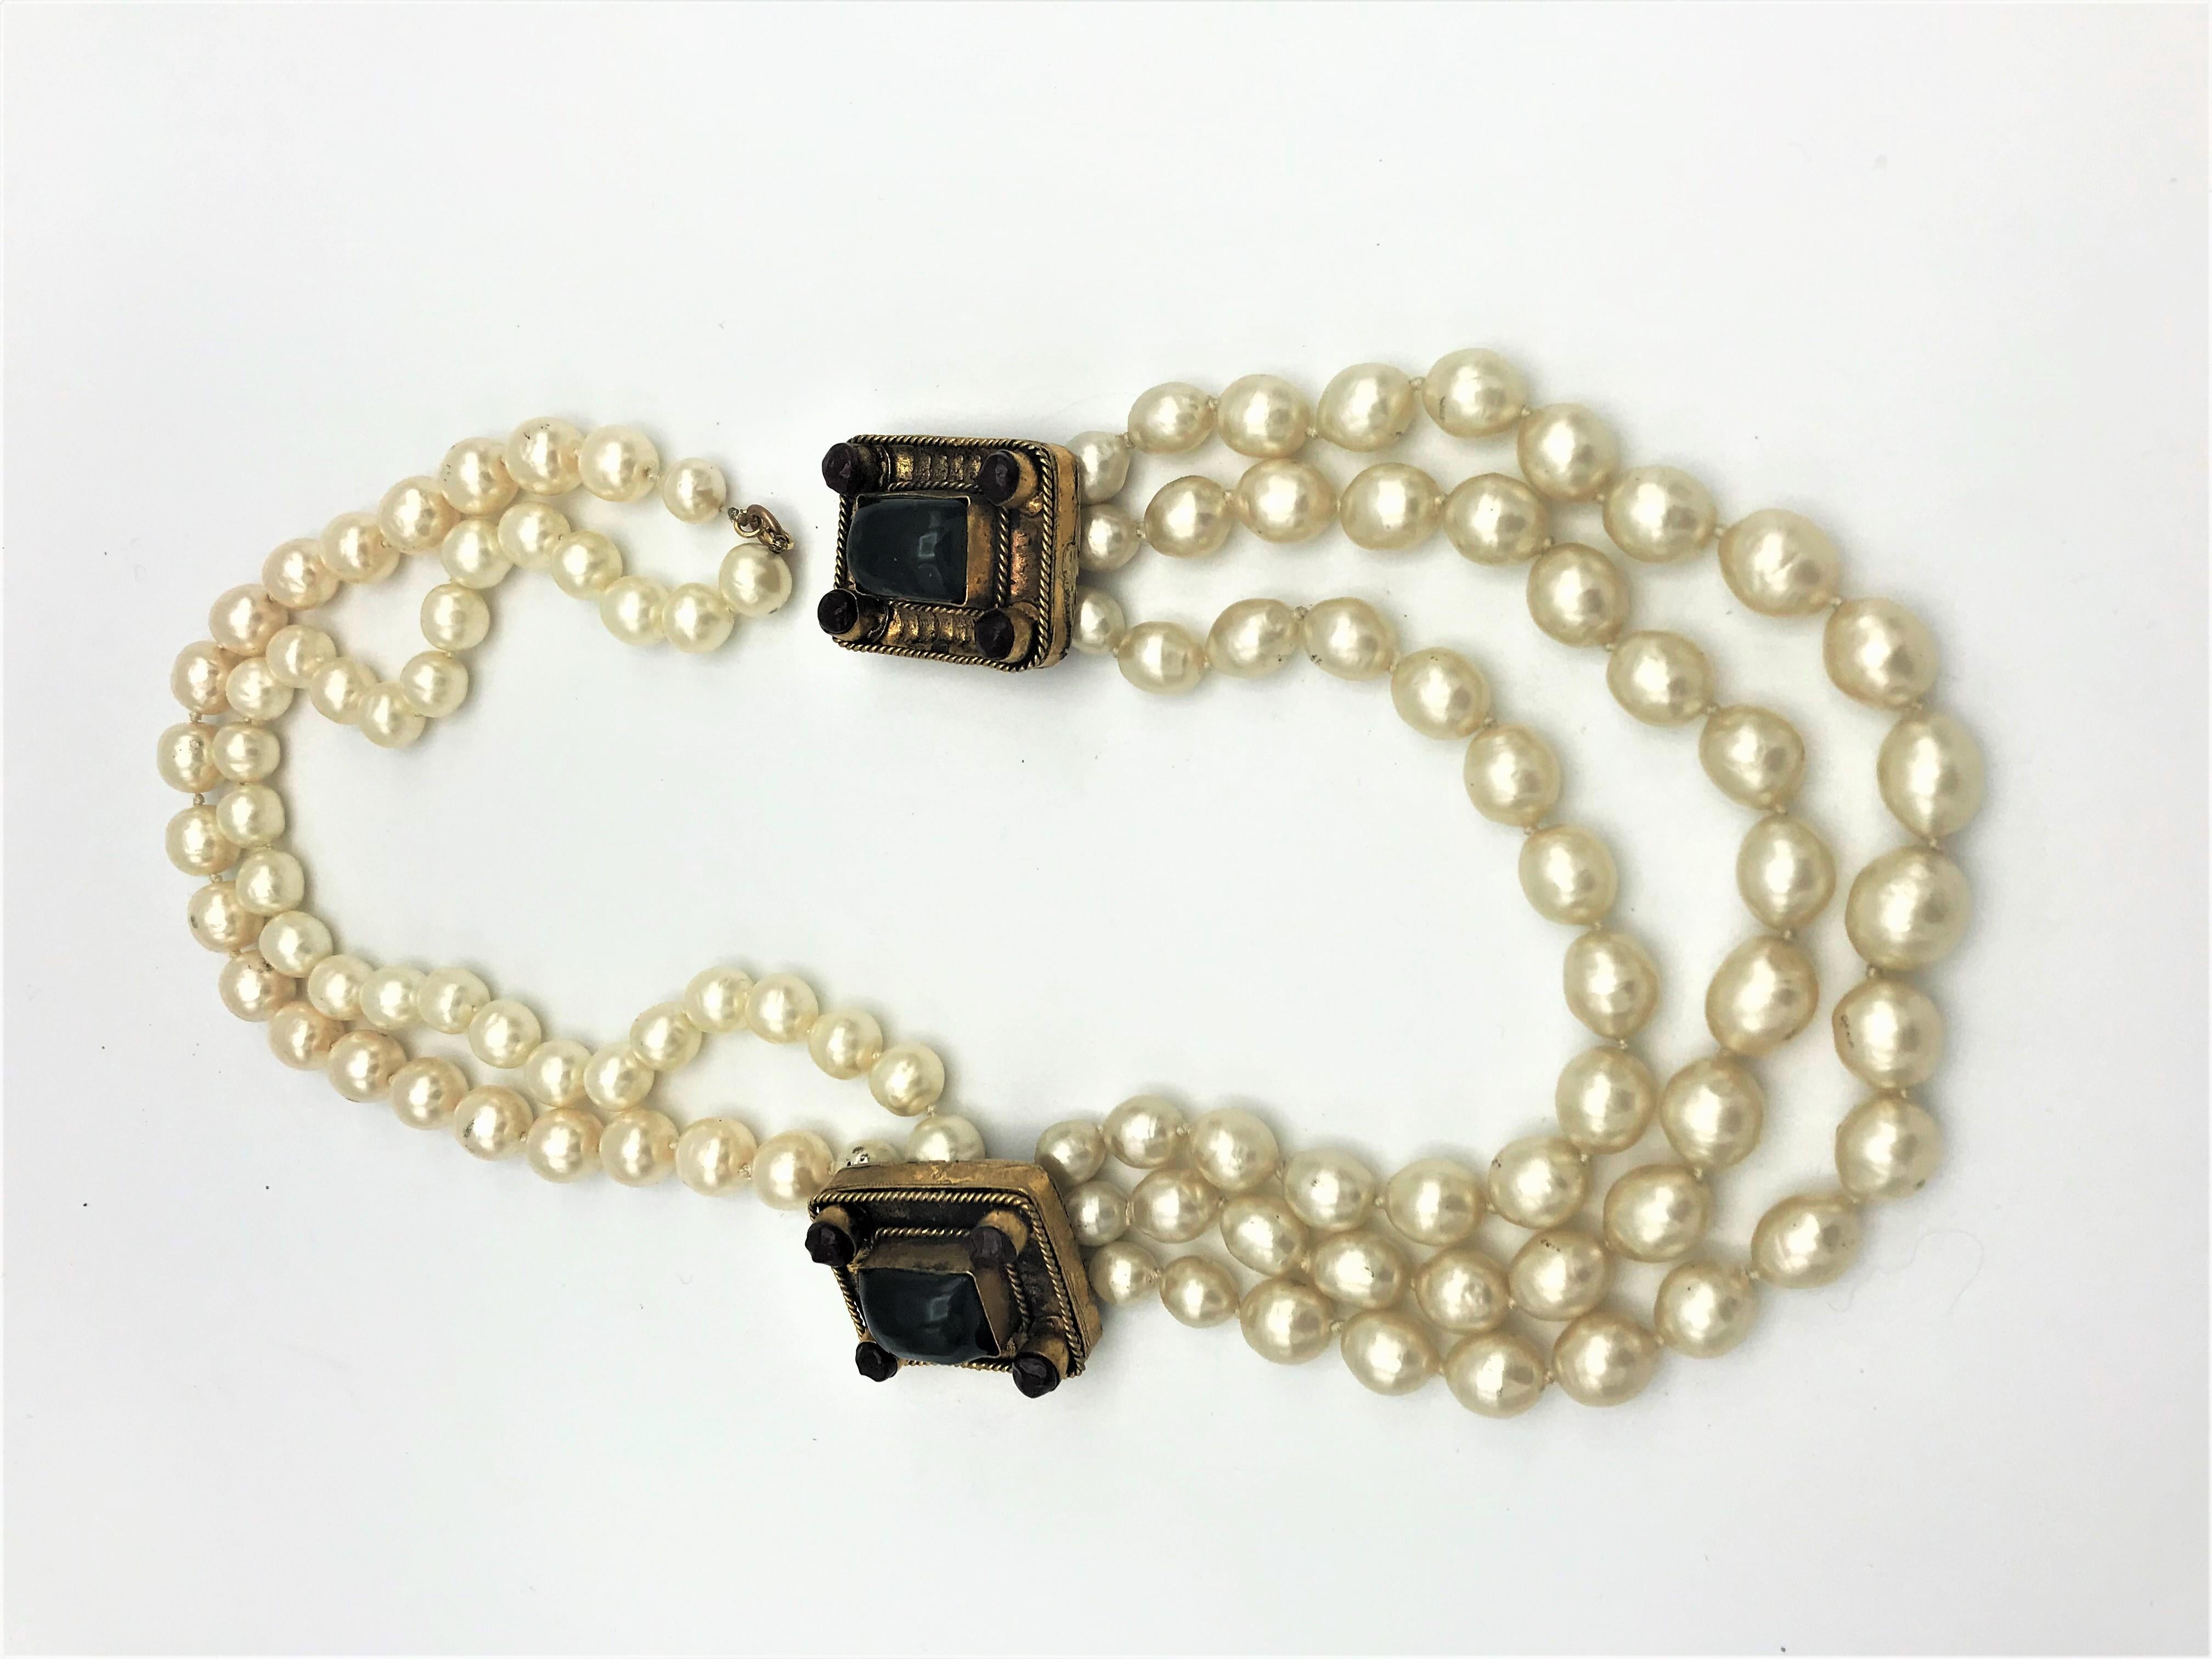 Vintage Chanel pearl necklace by R. Goossens and House of Gripoix signed 1984. 8